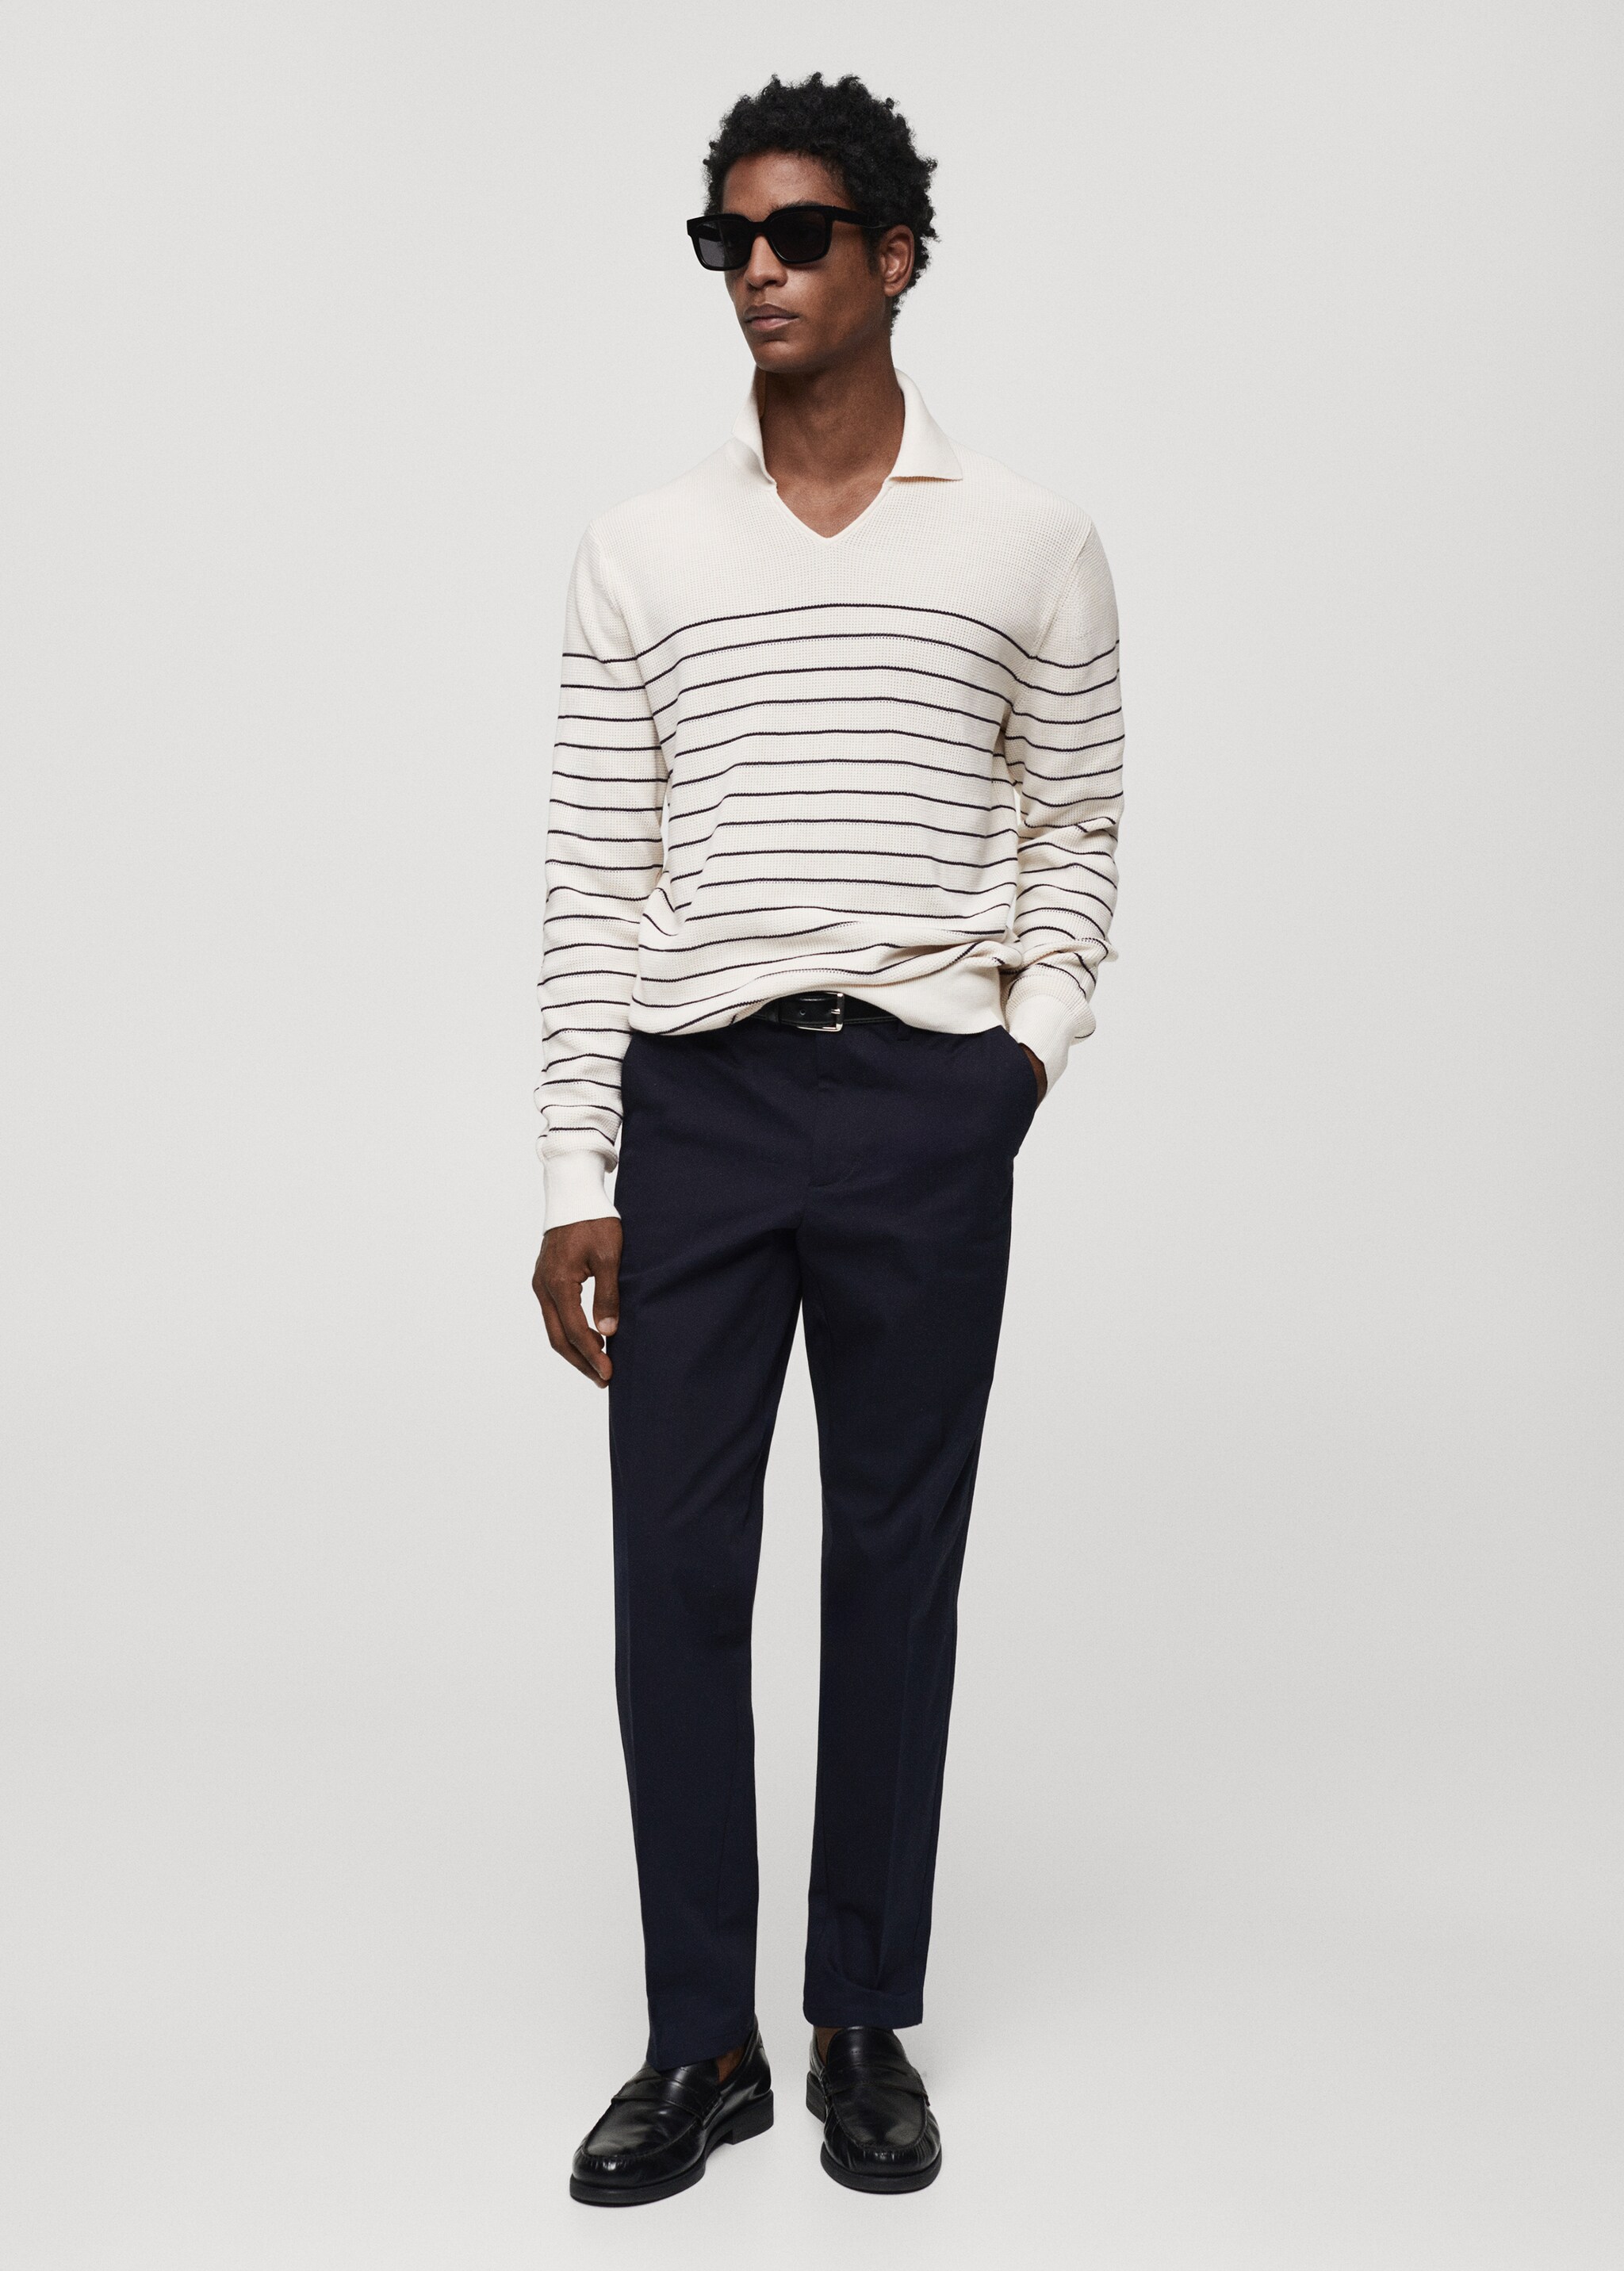 Striped polo-style sweater - General plane